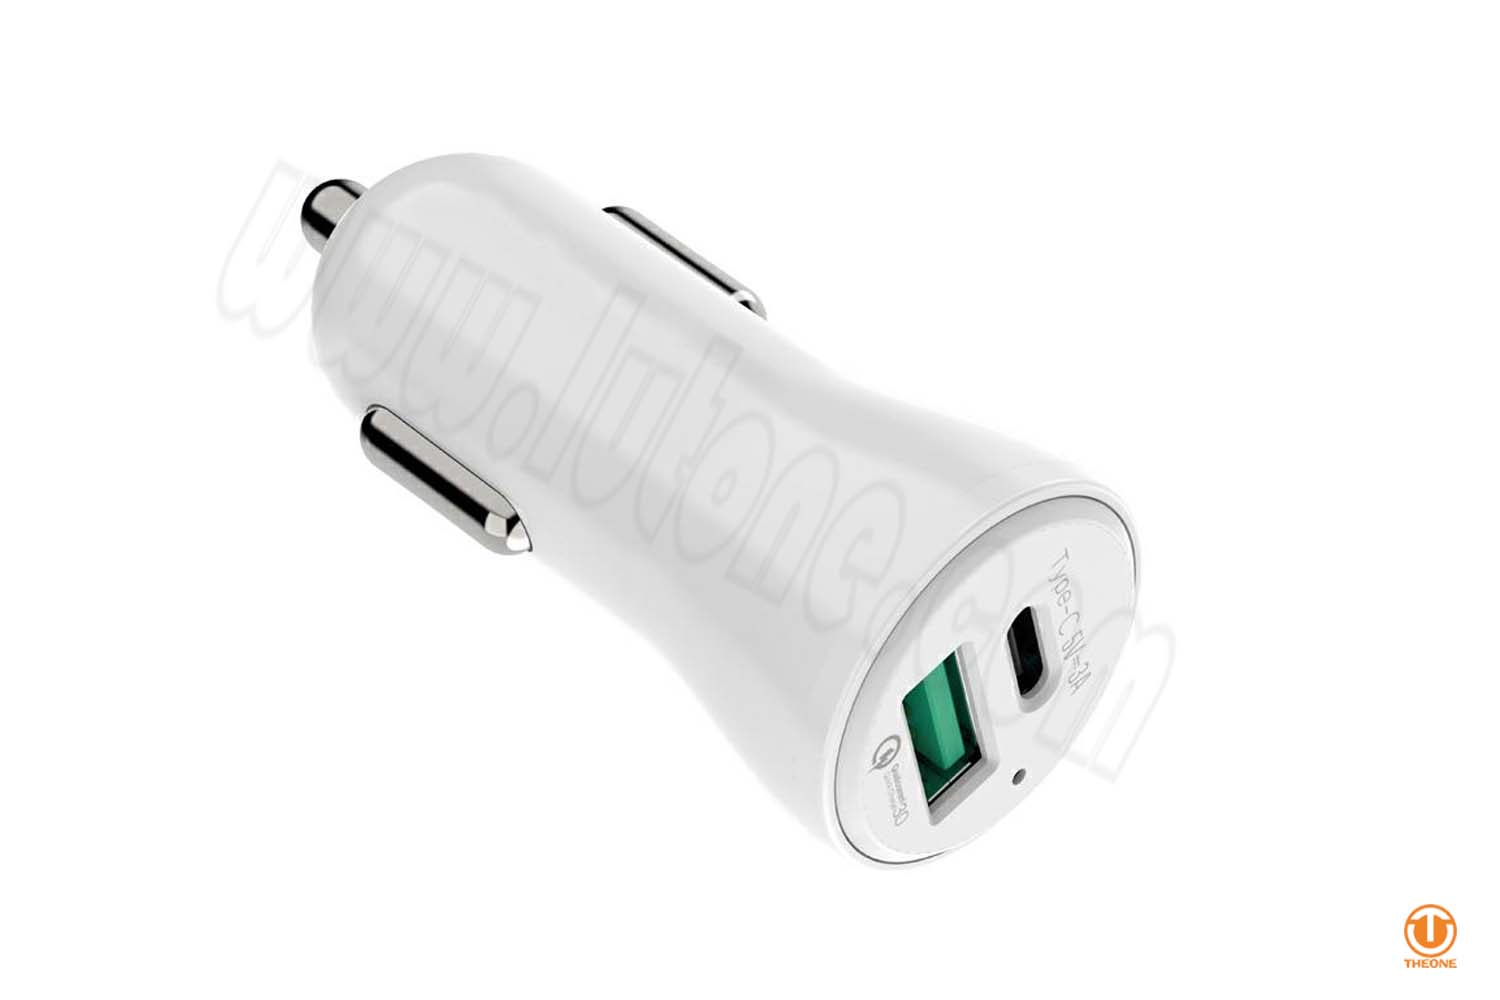 tc33c-2 typec usb car charger quick charger3.0